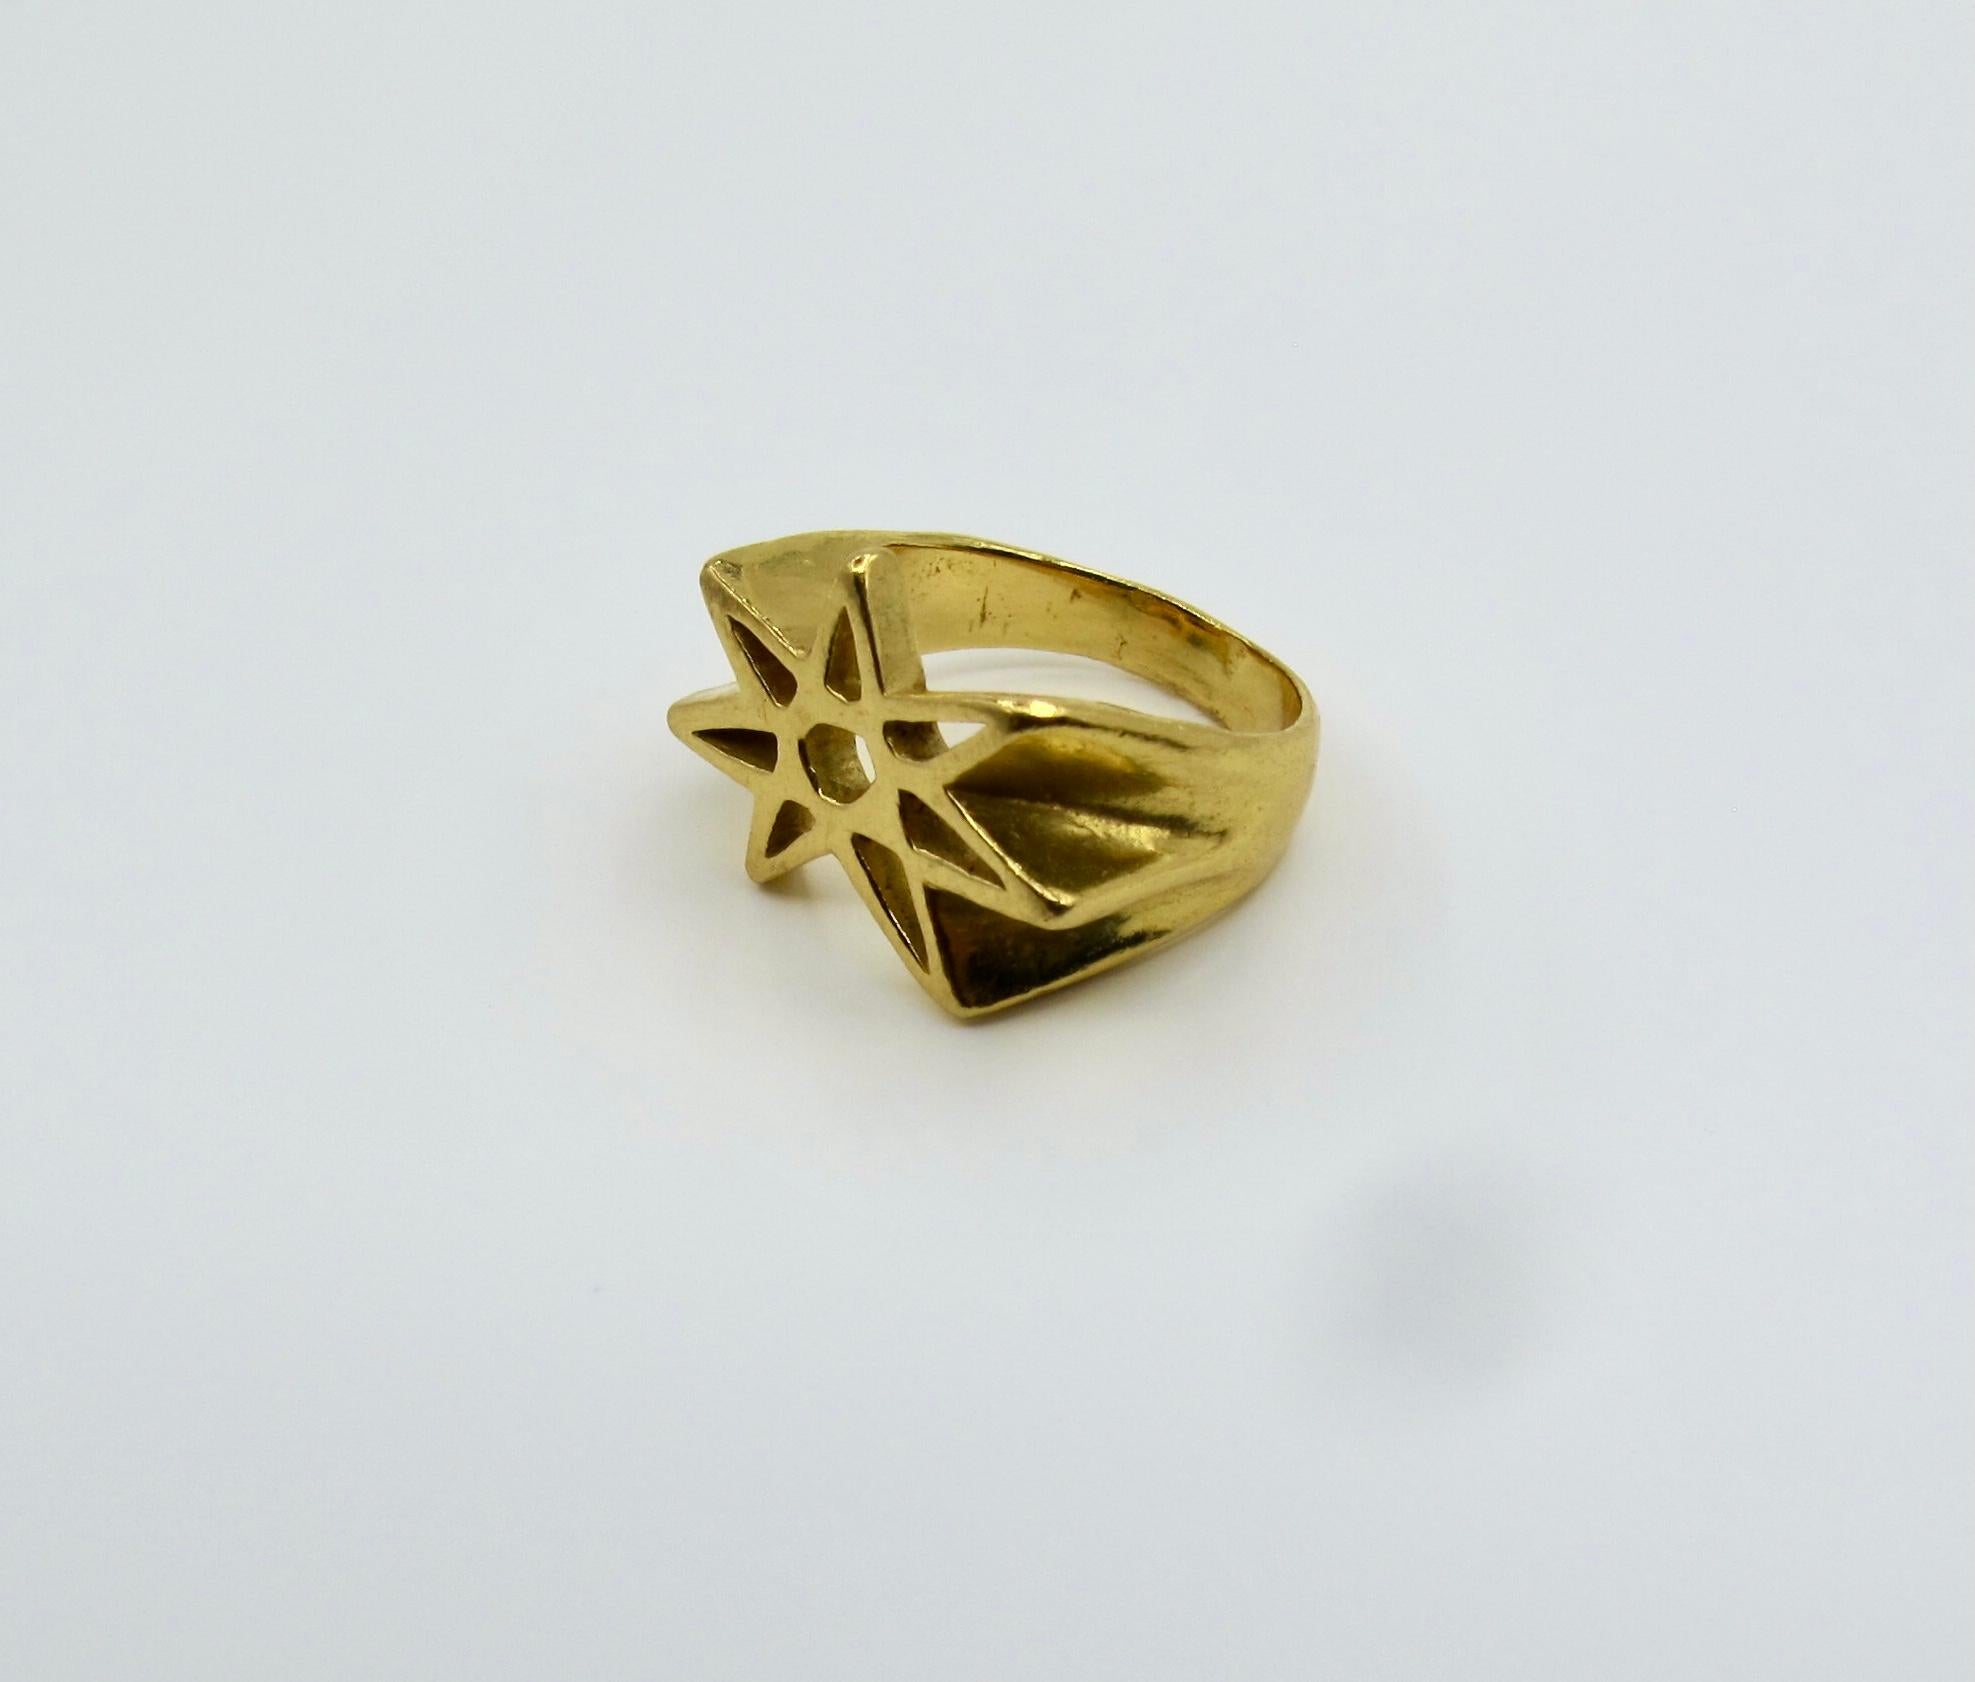 For Sale:  RIMA JEWELS 22k Gold Alchemical Seven Pointed Star Ring 5